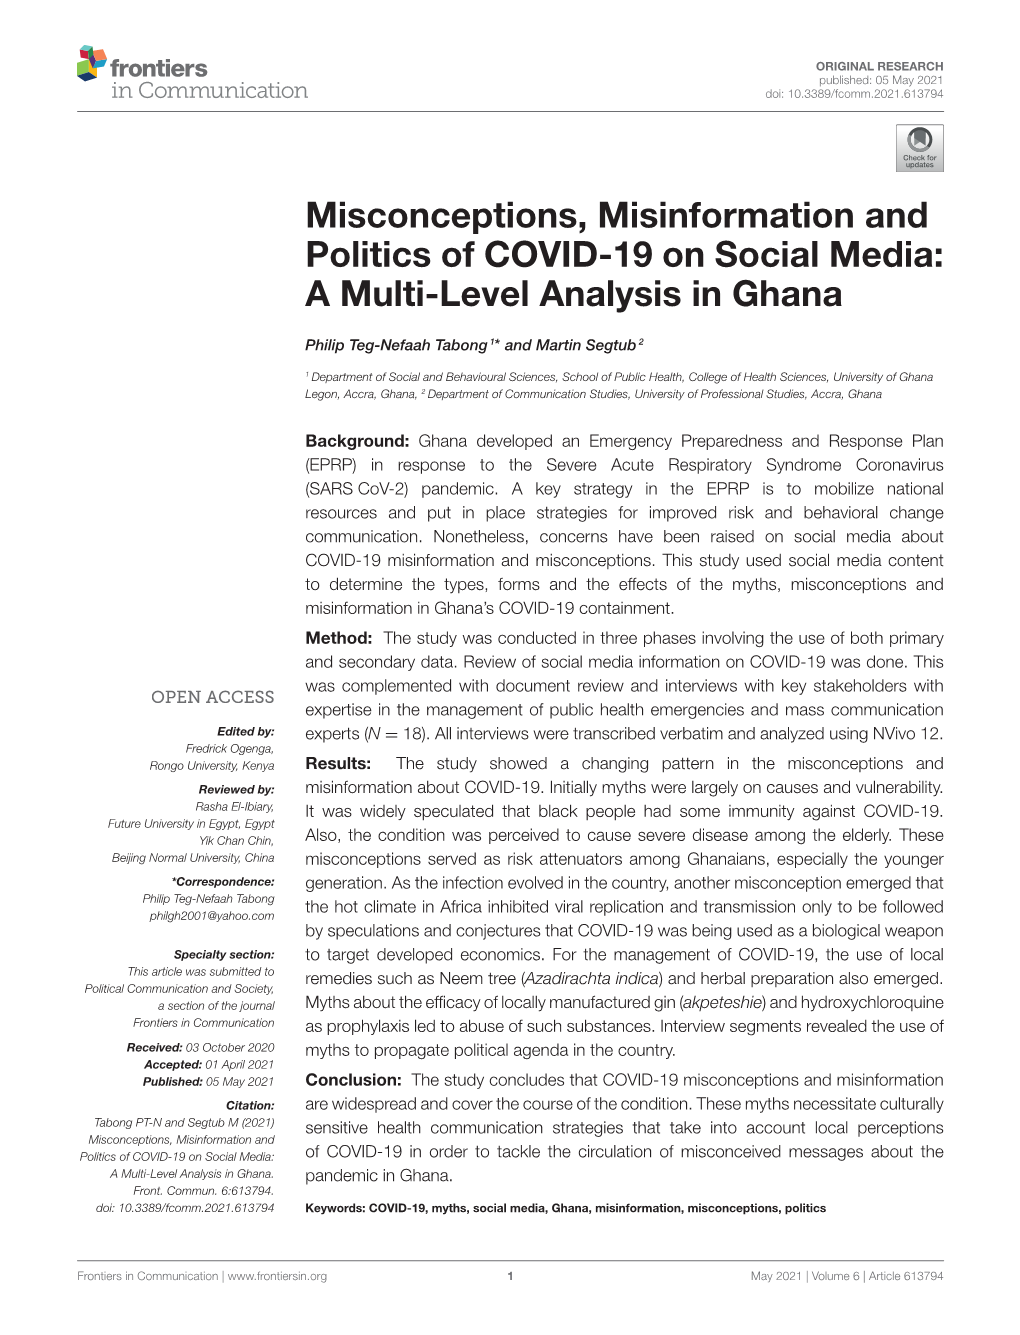 Misconceptions, Misinformation and Politics of COVID-19 on Social Media: a Multi-Level Analysis in Ghana